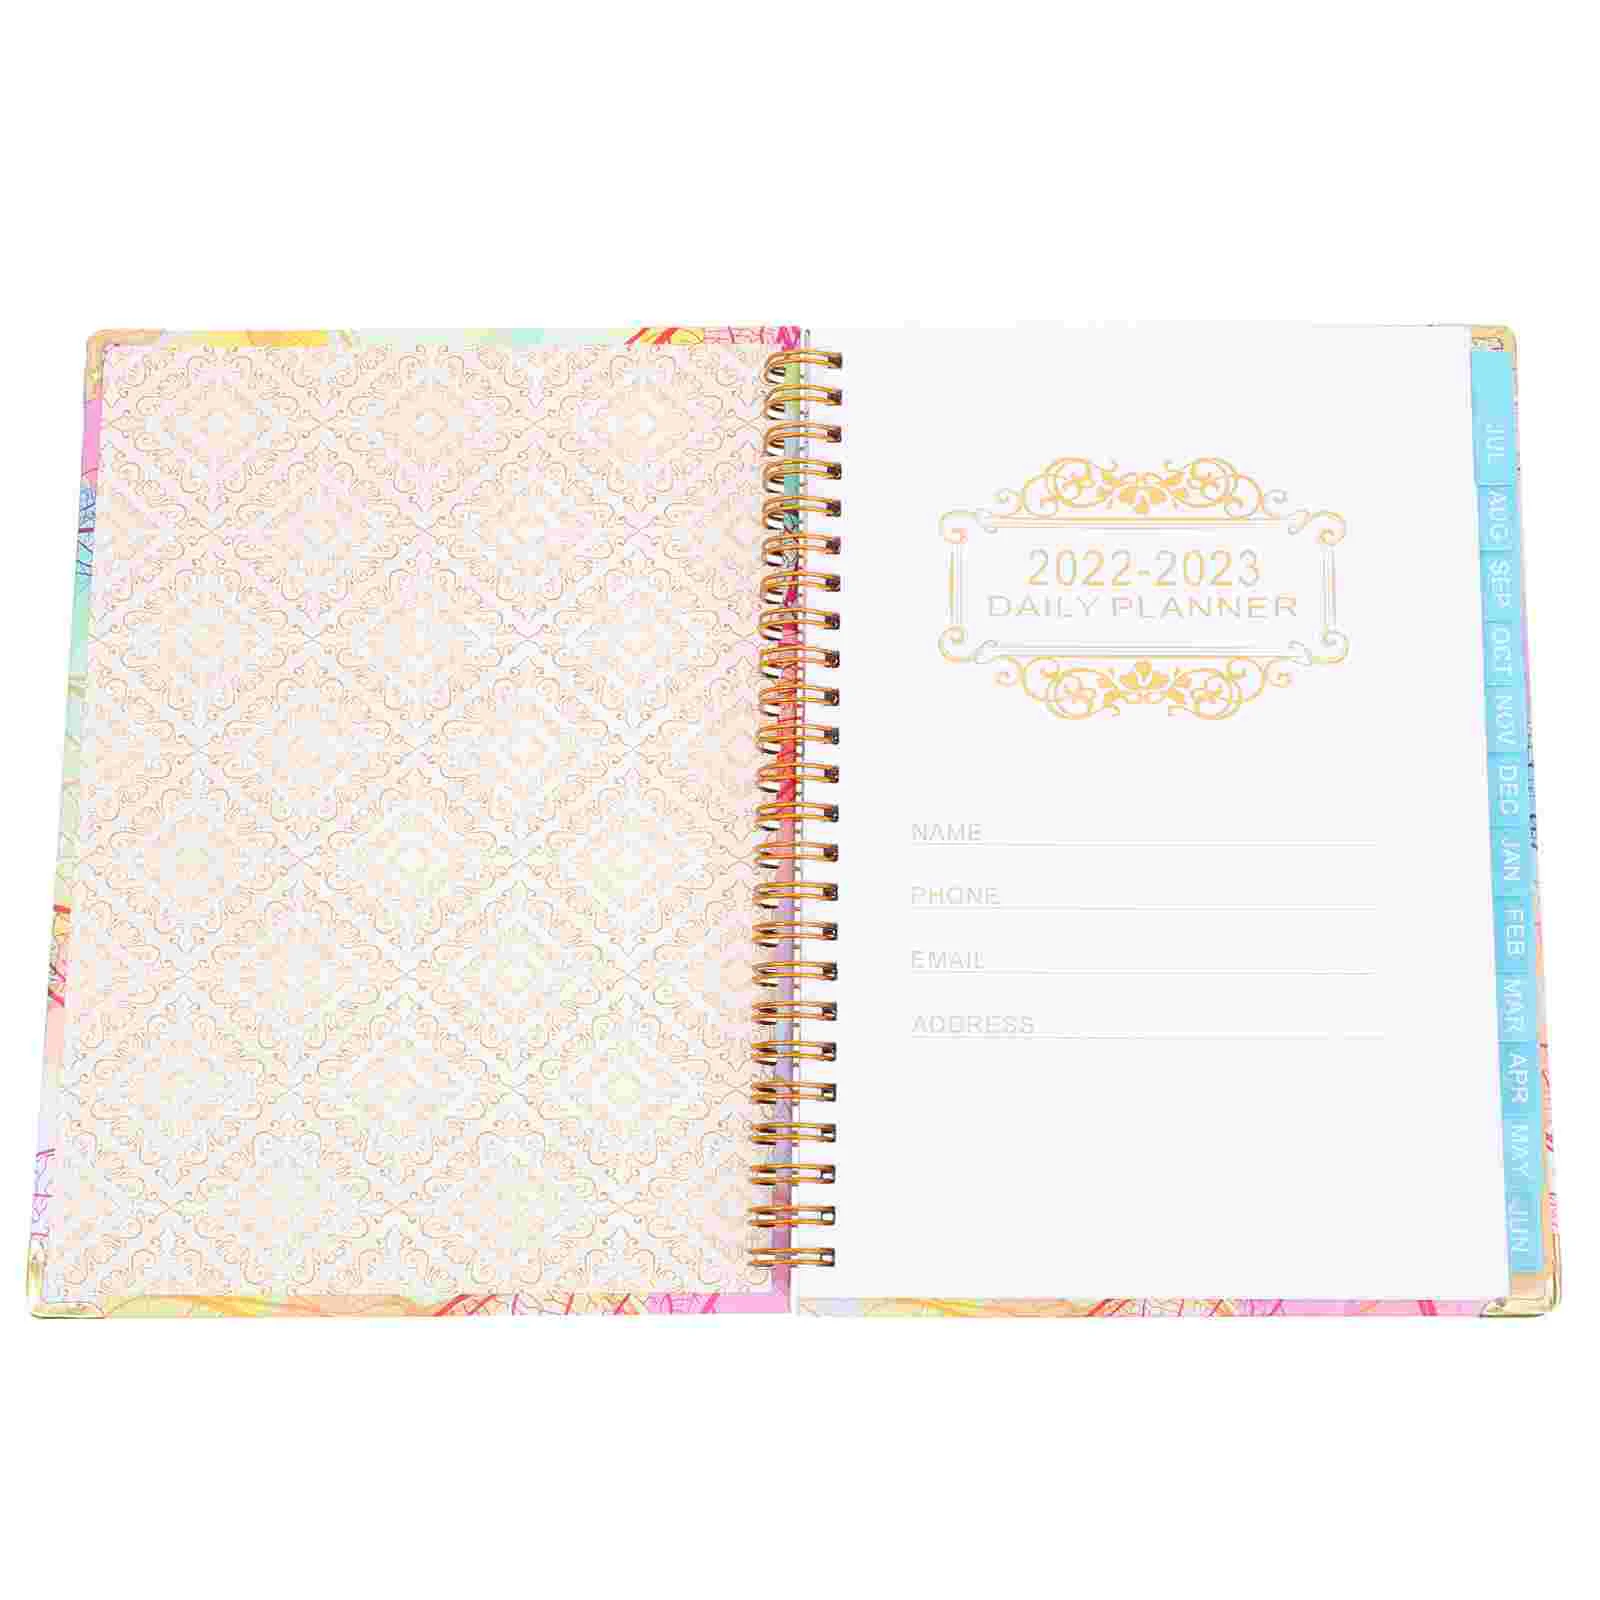 

Planner Notebook Spiral Monthly Notepad 2023 Appointment Schedule Management Time Do Listbusiness Hourly Weekly Journal Academic